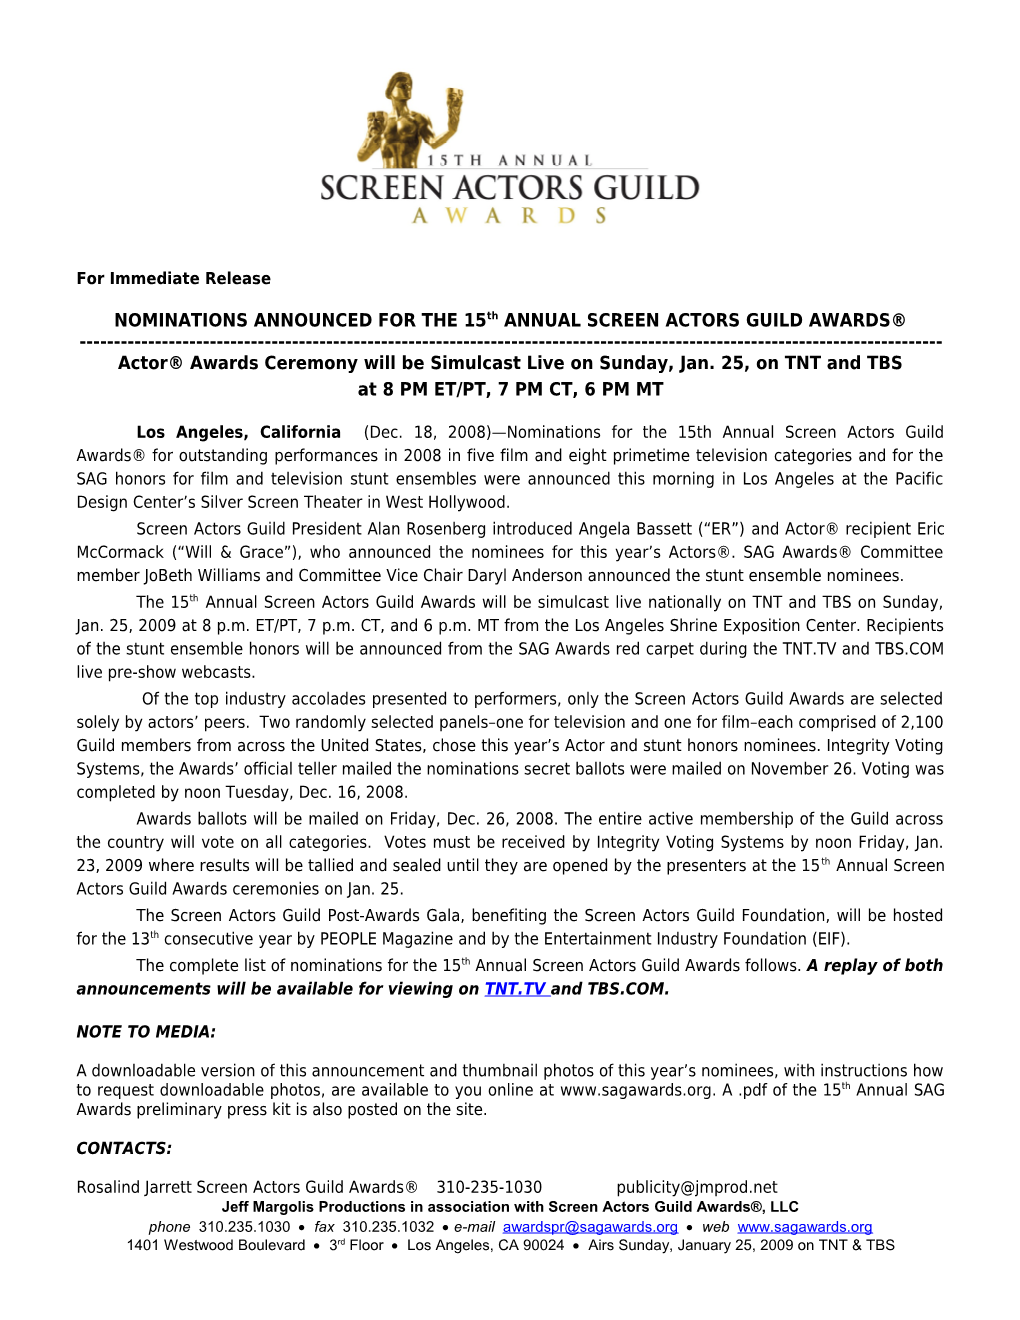 NOMINATIONS ANNOUNCED for the 12Th ANNUAL SCREEN ACTORS GUILD AWARDS